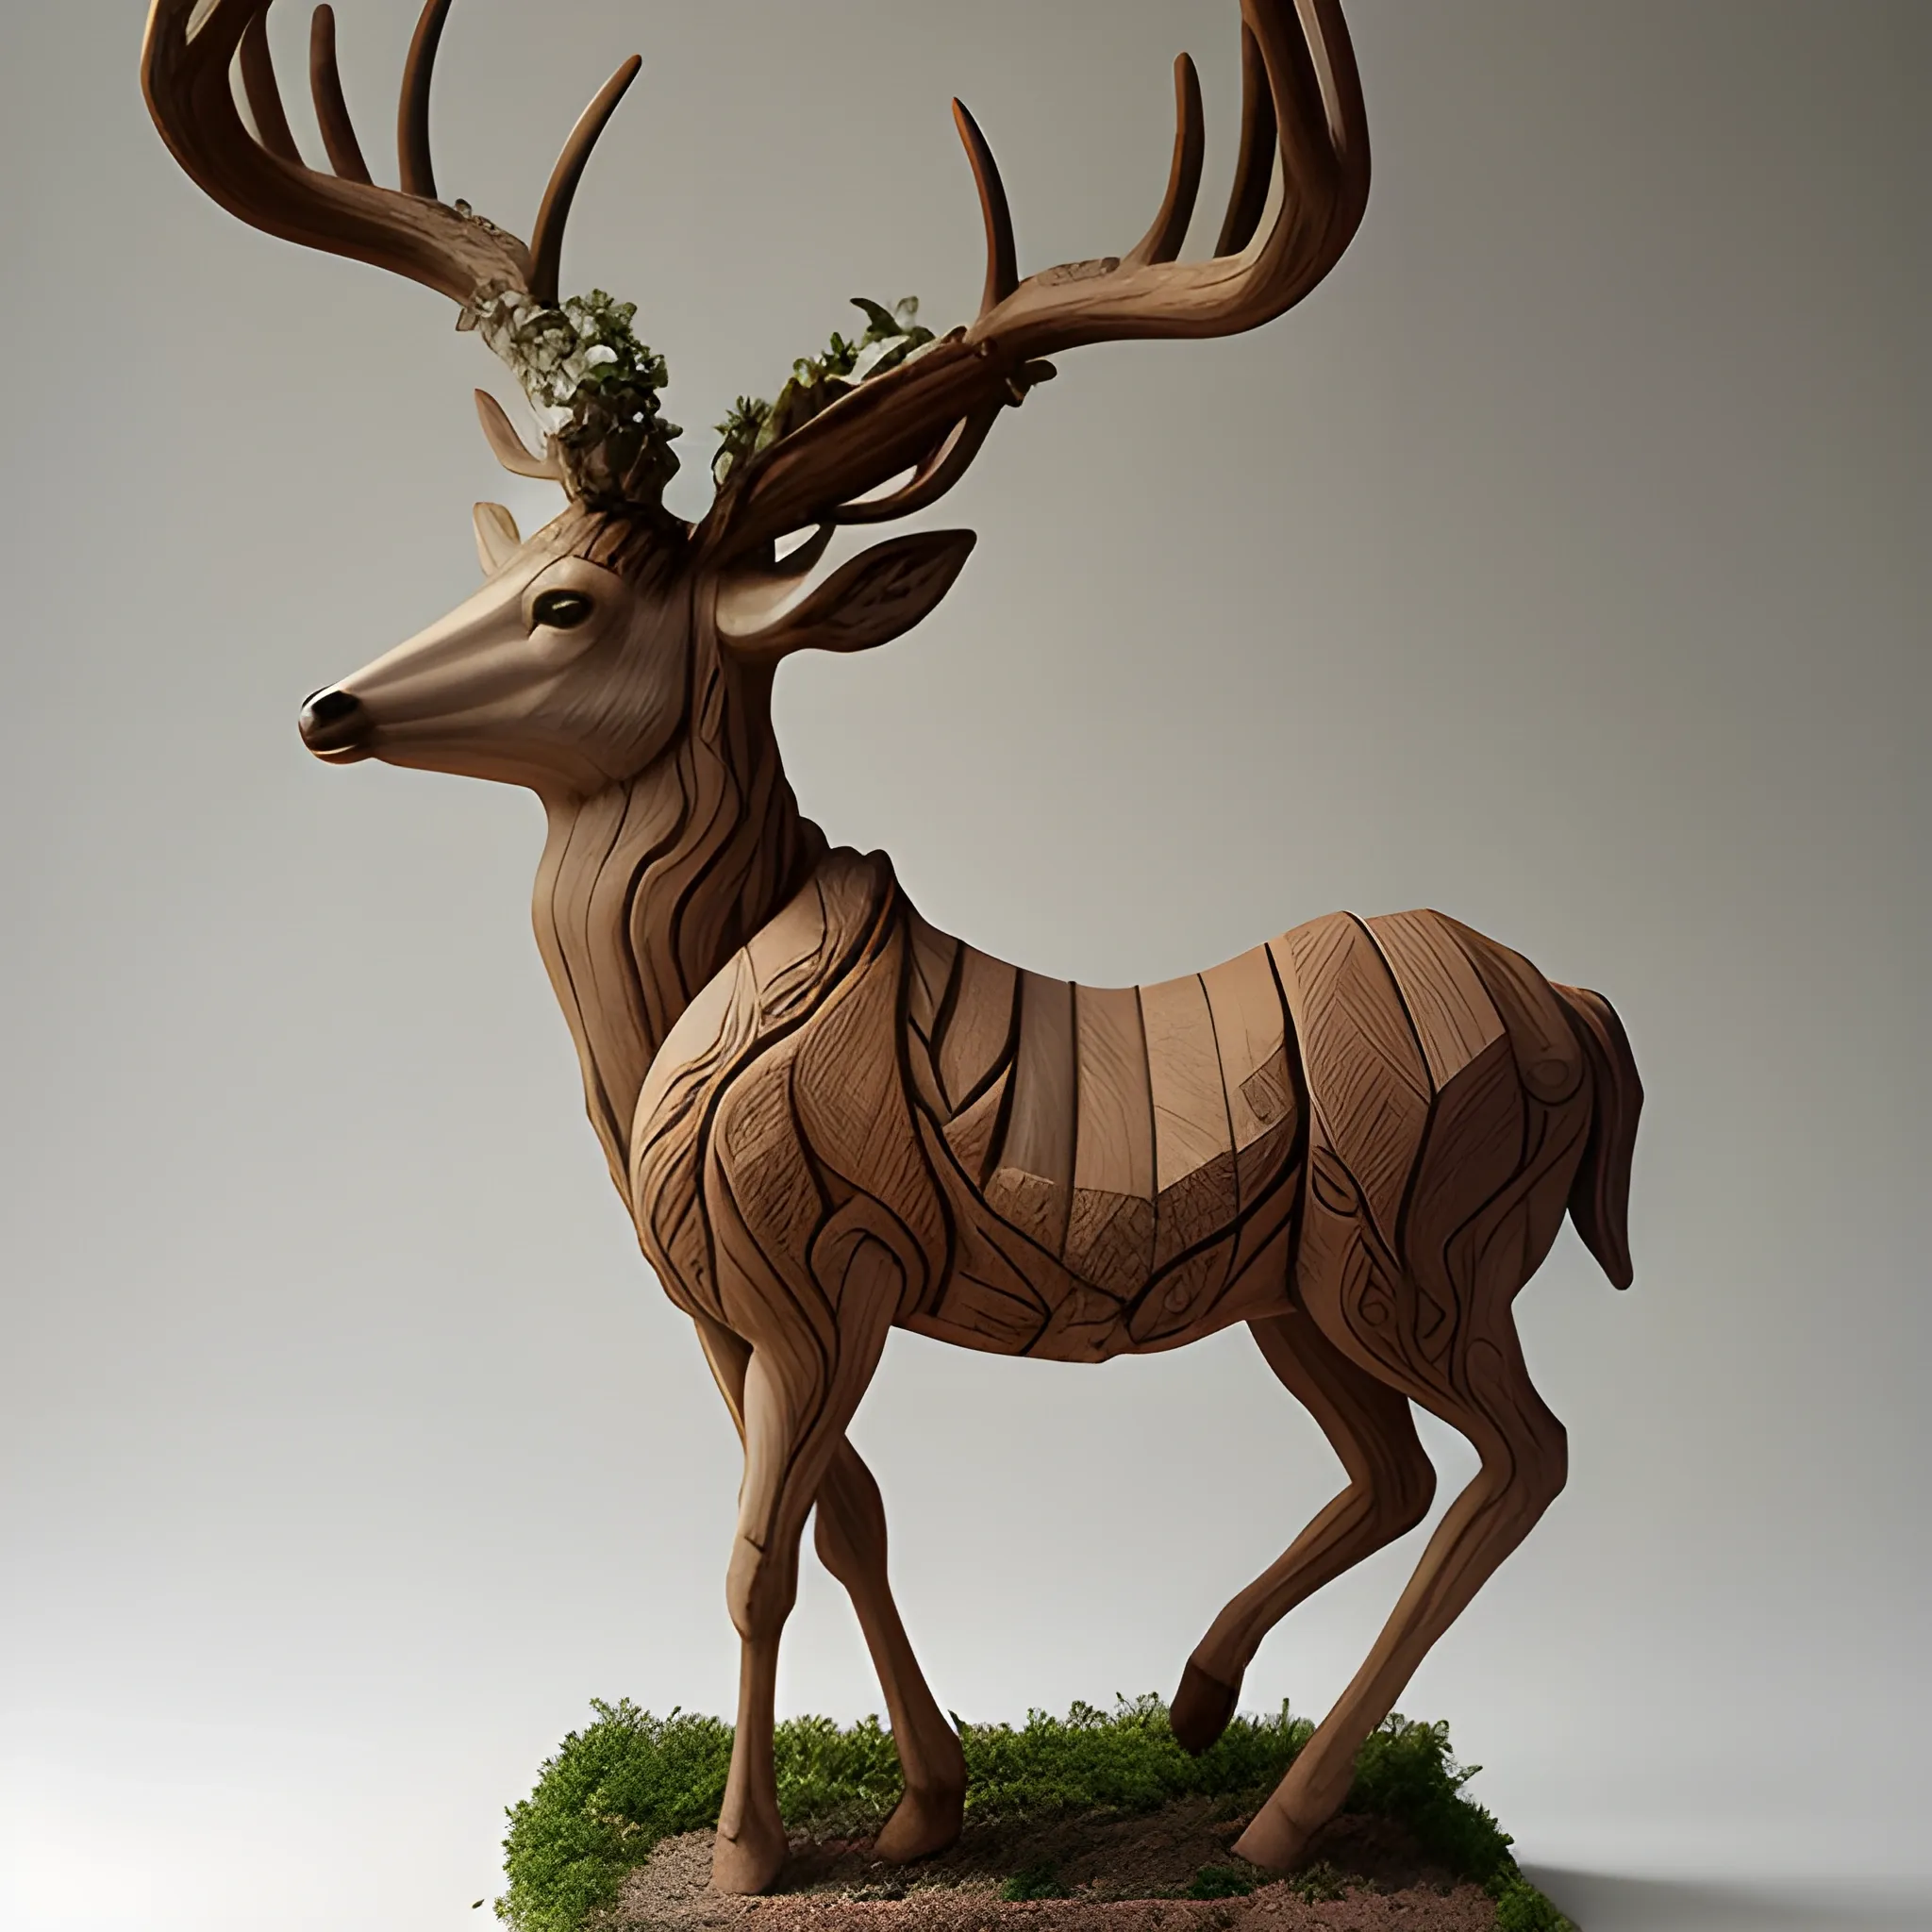 pencil sketch, wooden realistic  sculpture, goddess of deer and plants, mounted on a mixed deer and horse beast. made by a genius modern sculptor of 21 century